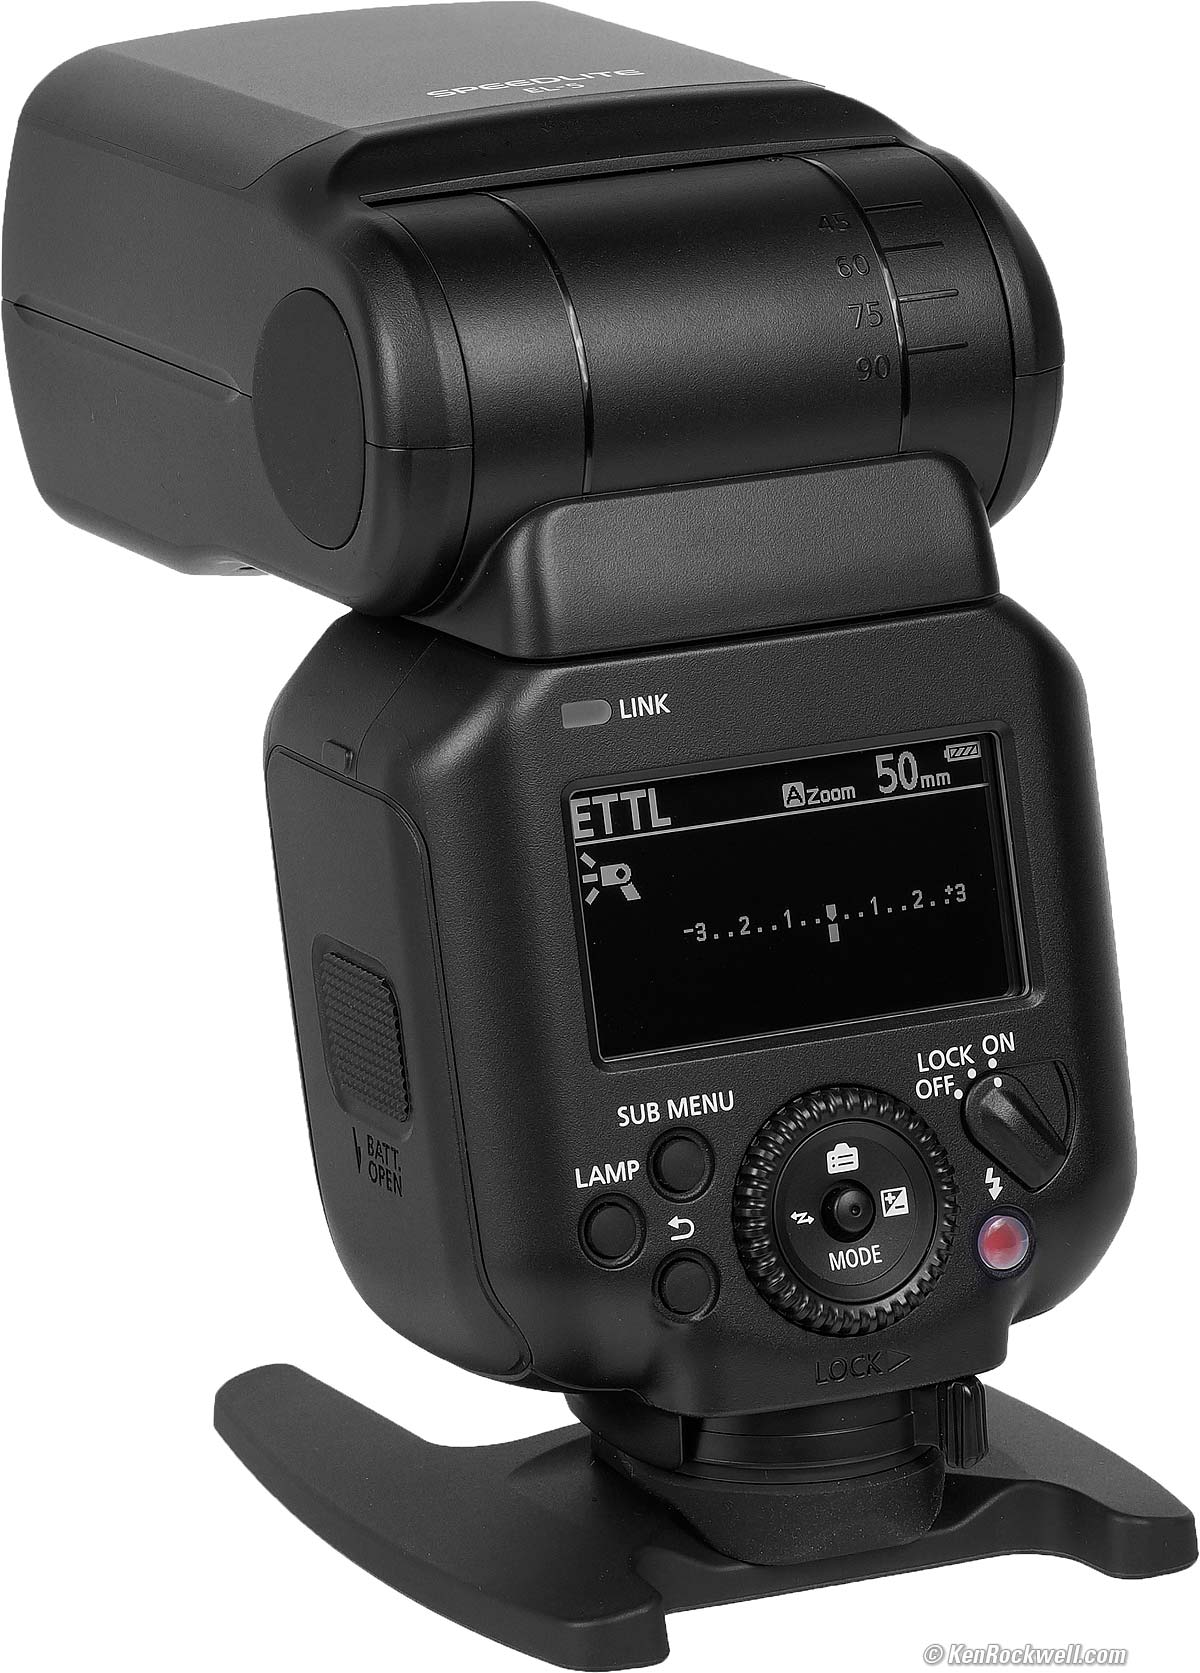 Canon EL-5 Flash Review by Ken Rockwell